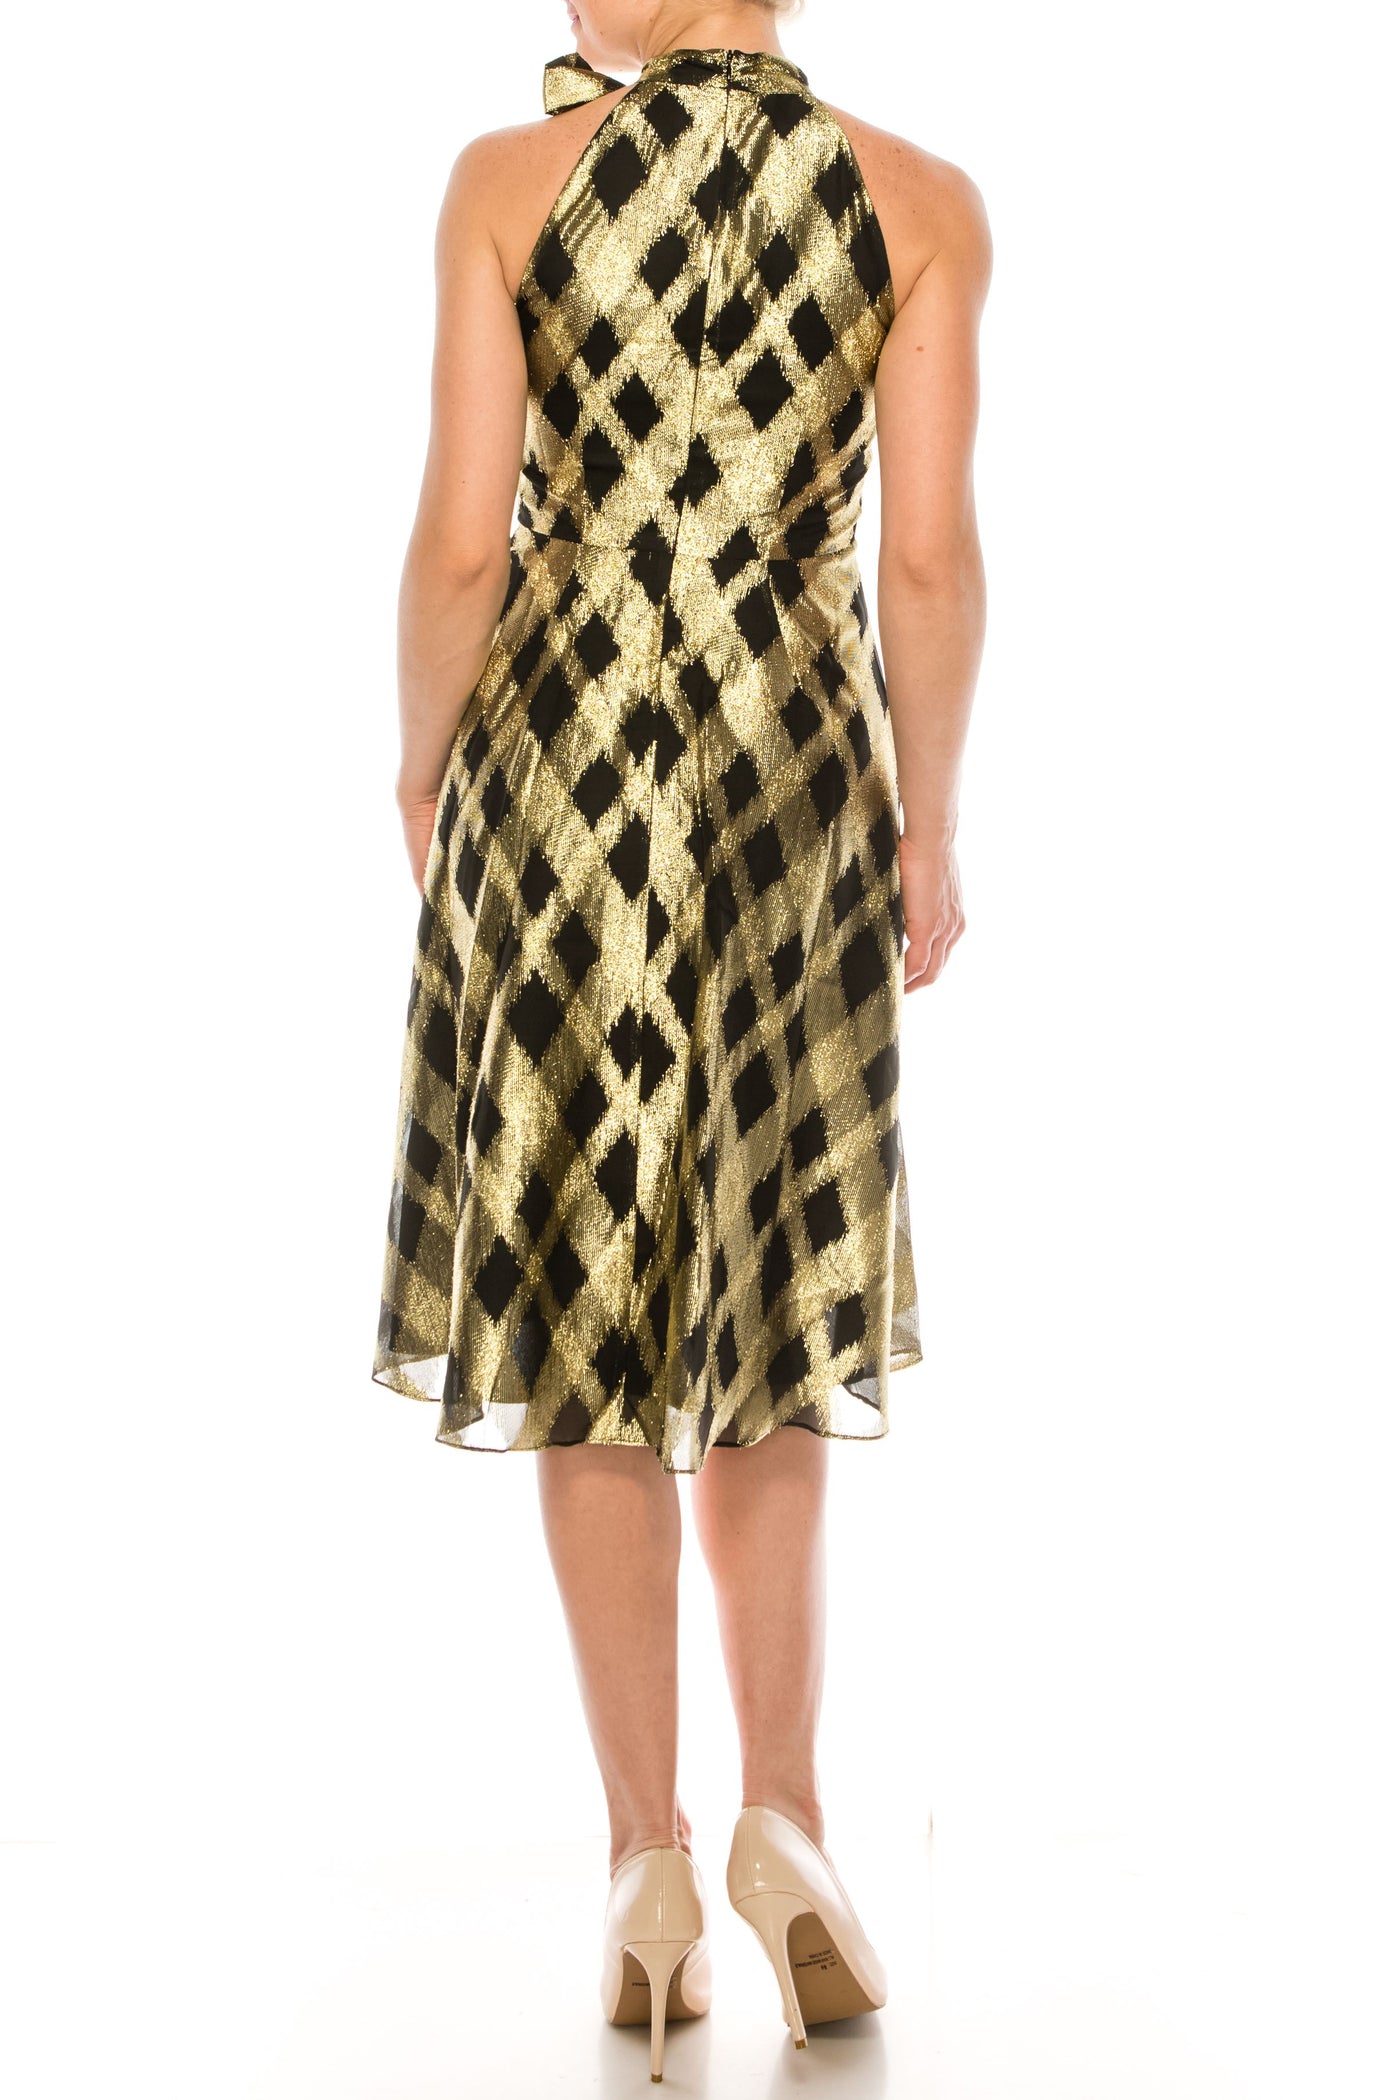 Maggy London - G4749M High Halter A-Line Knee-Length Dress In Black and Gold